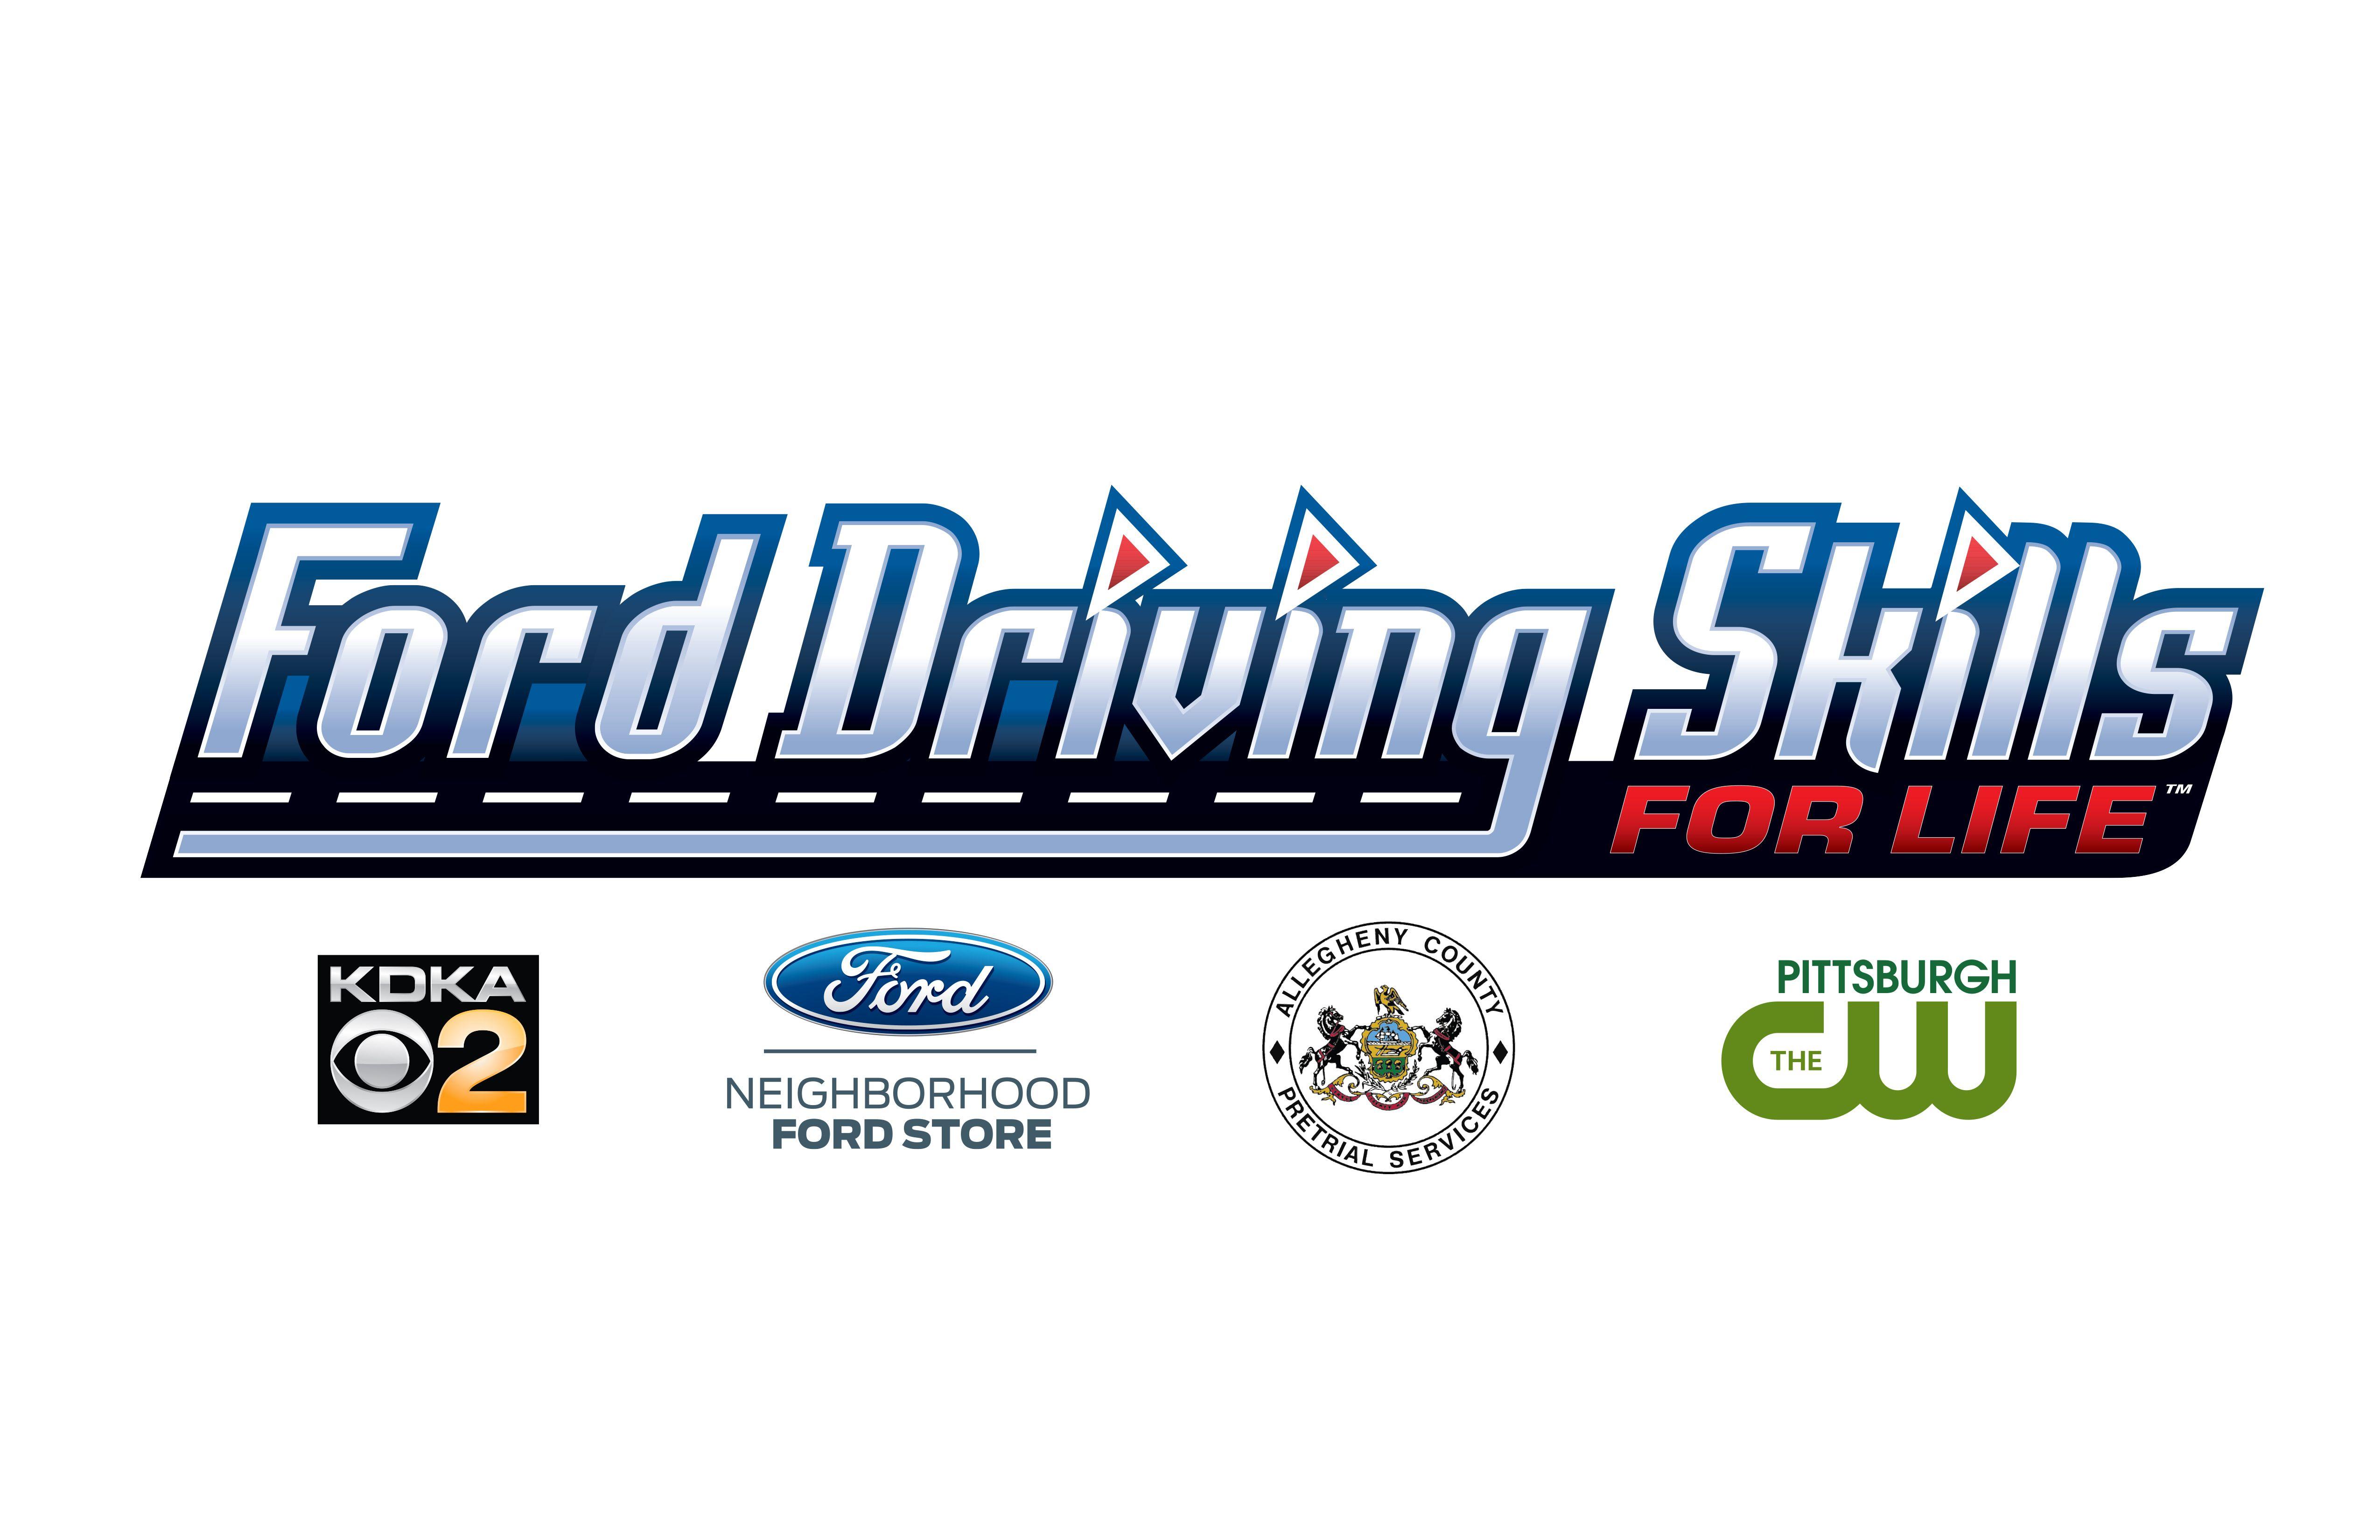 KDKA Logo - Taking The Lead: Ford Driving Skills For Life – CBS Pittsburgh